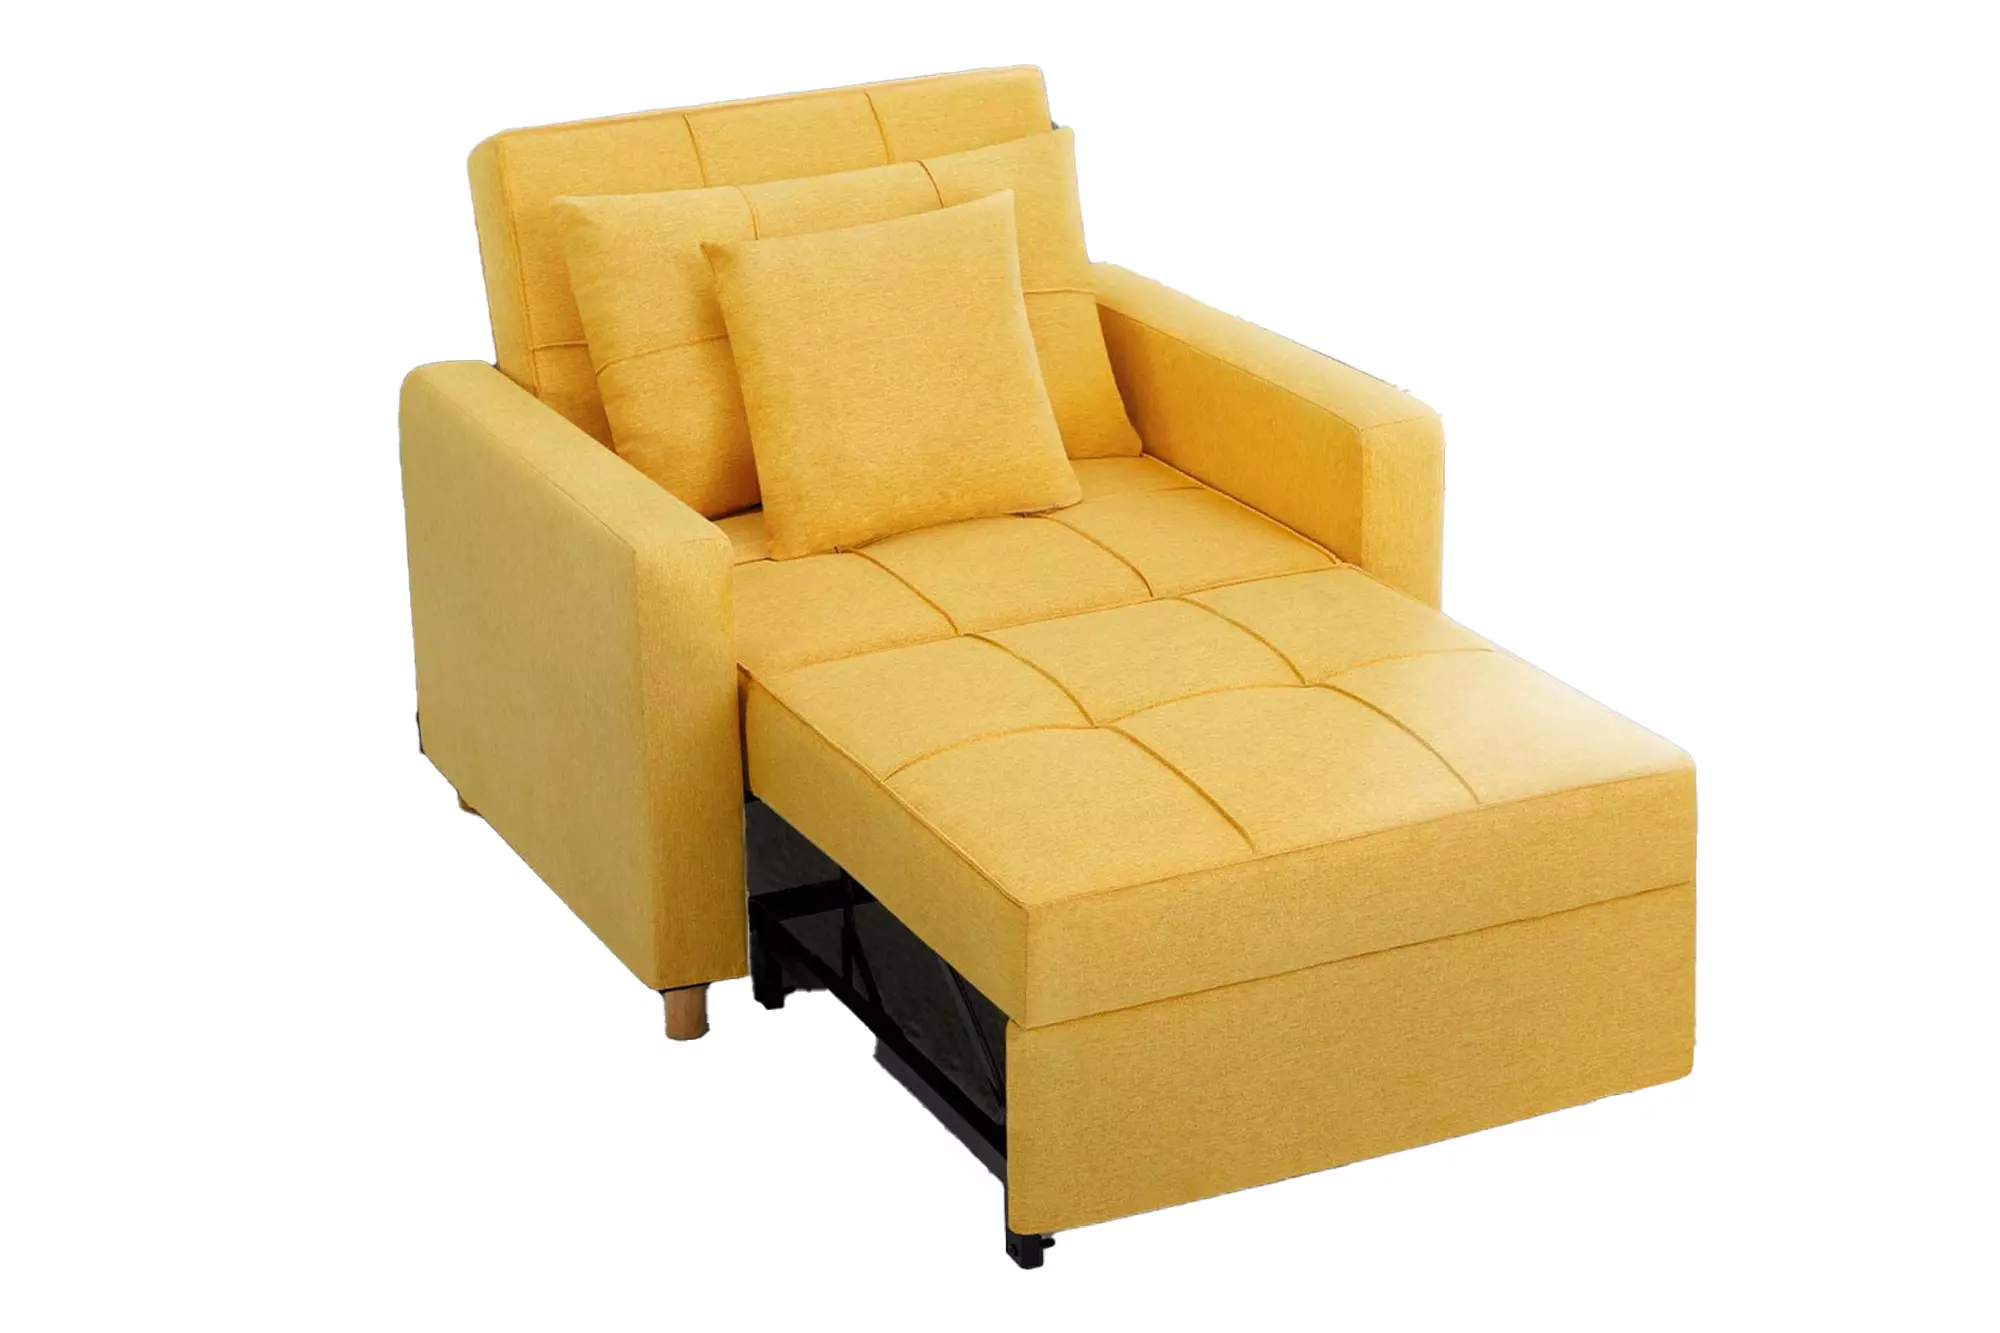 Esright 40" Sofa Bed 3-in-1 Convertible Chair